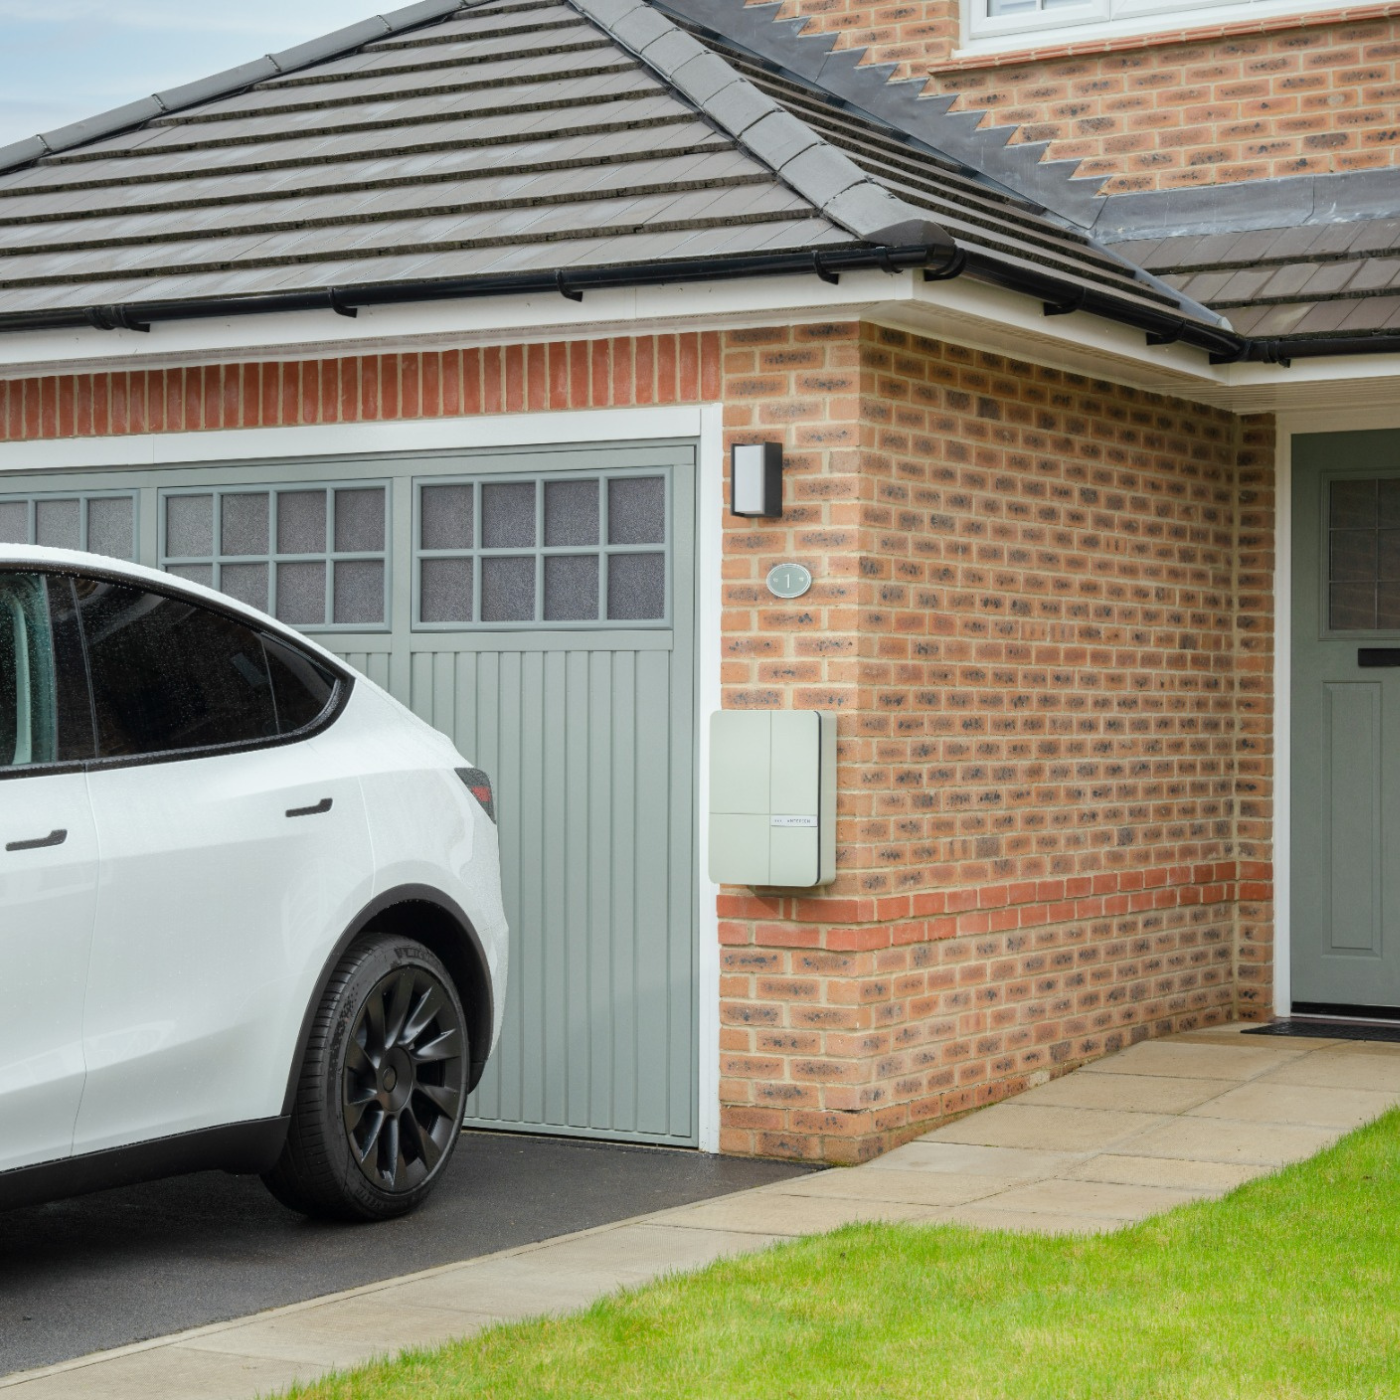 House & Garage with Andersen EV Home Charging Point Discreetly Installed